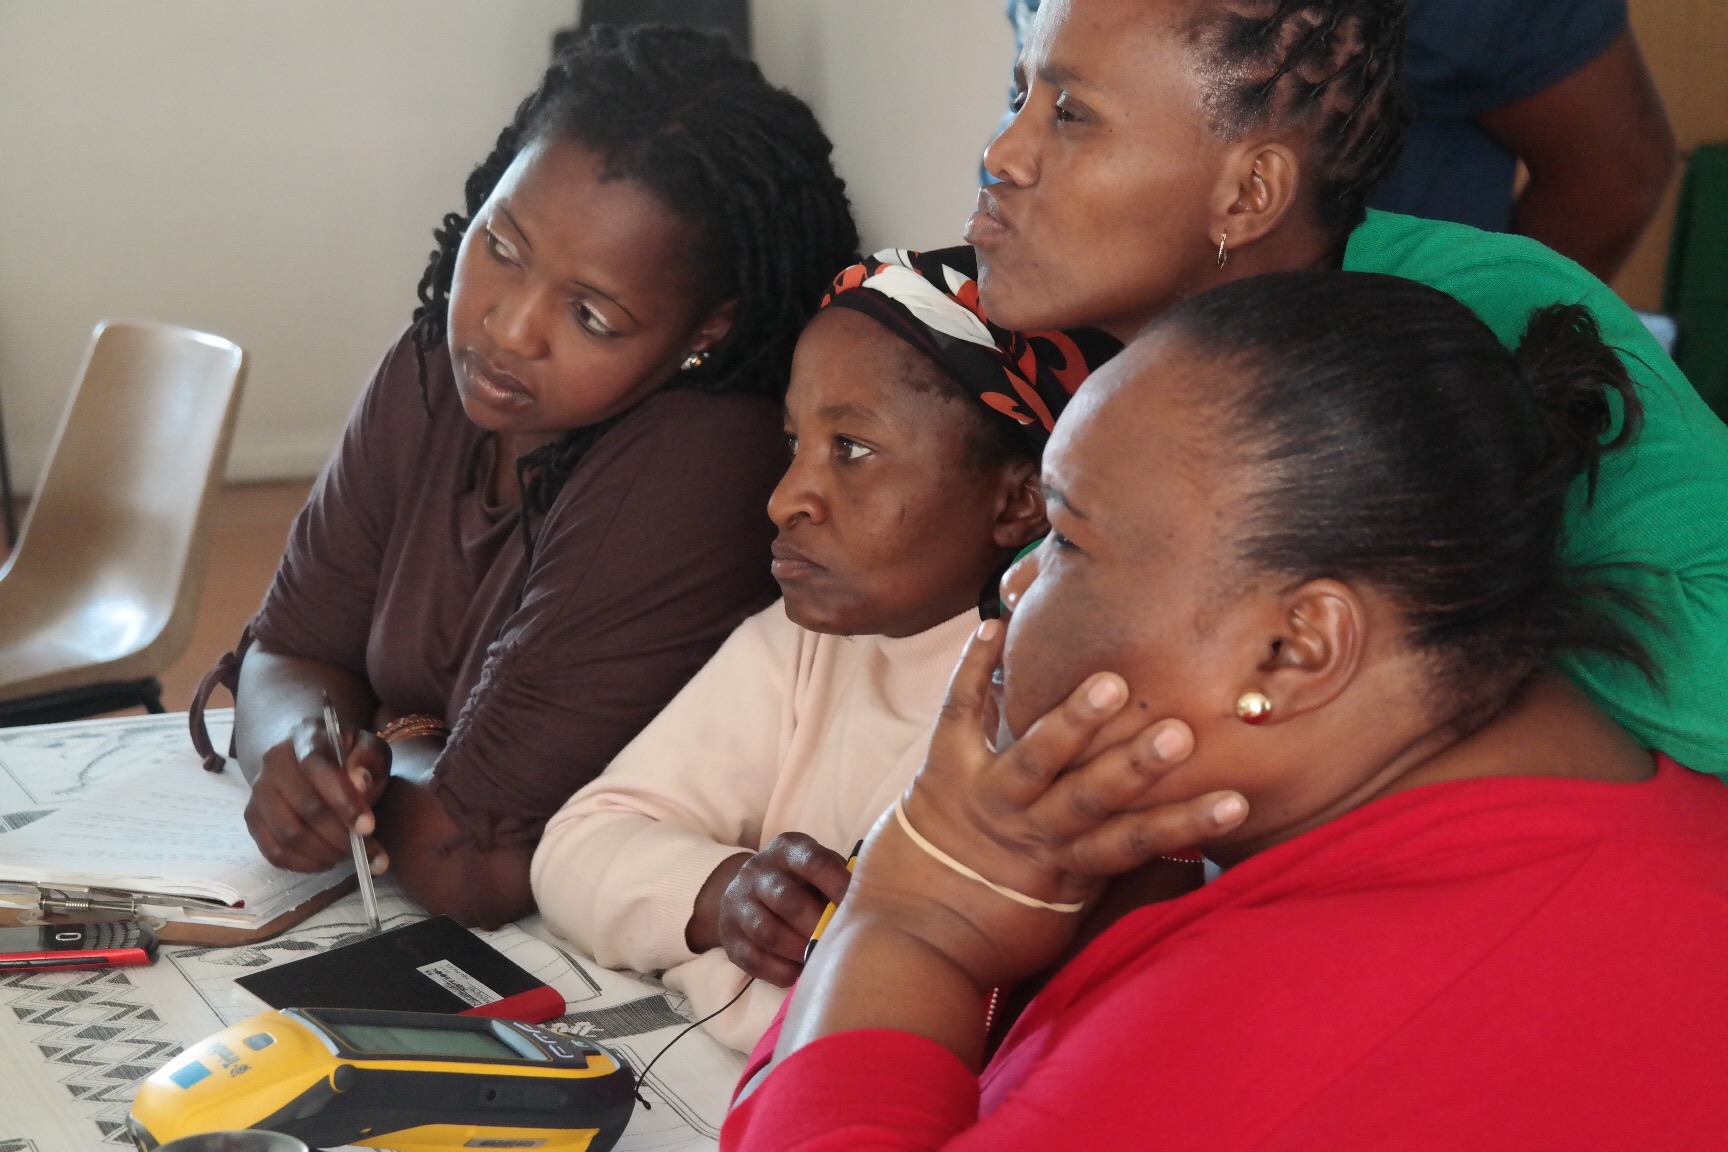 Community enumerators learn the basics of conducting a household-level survey using a data collection device called the Trimble during an enumerations training workshop.